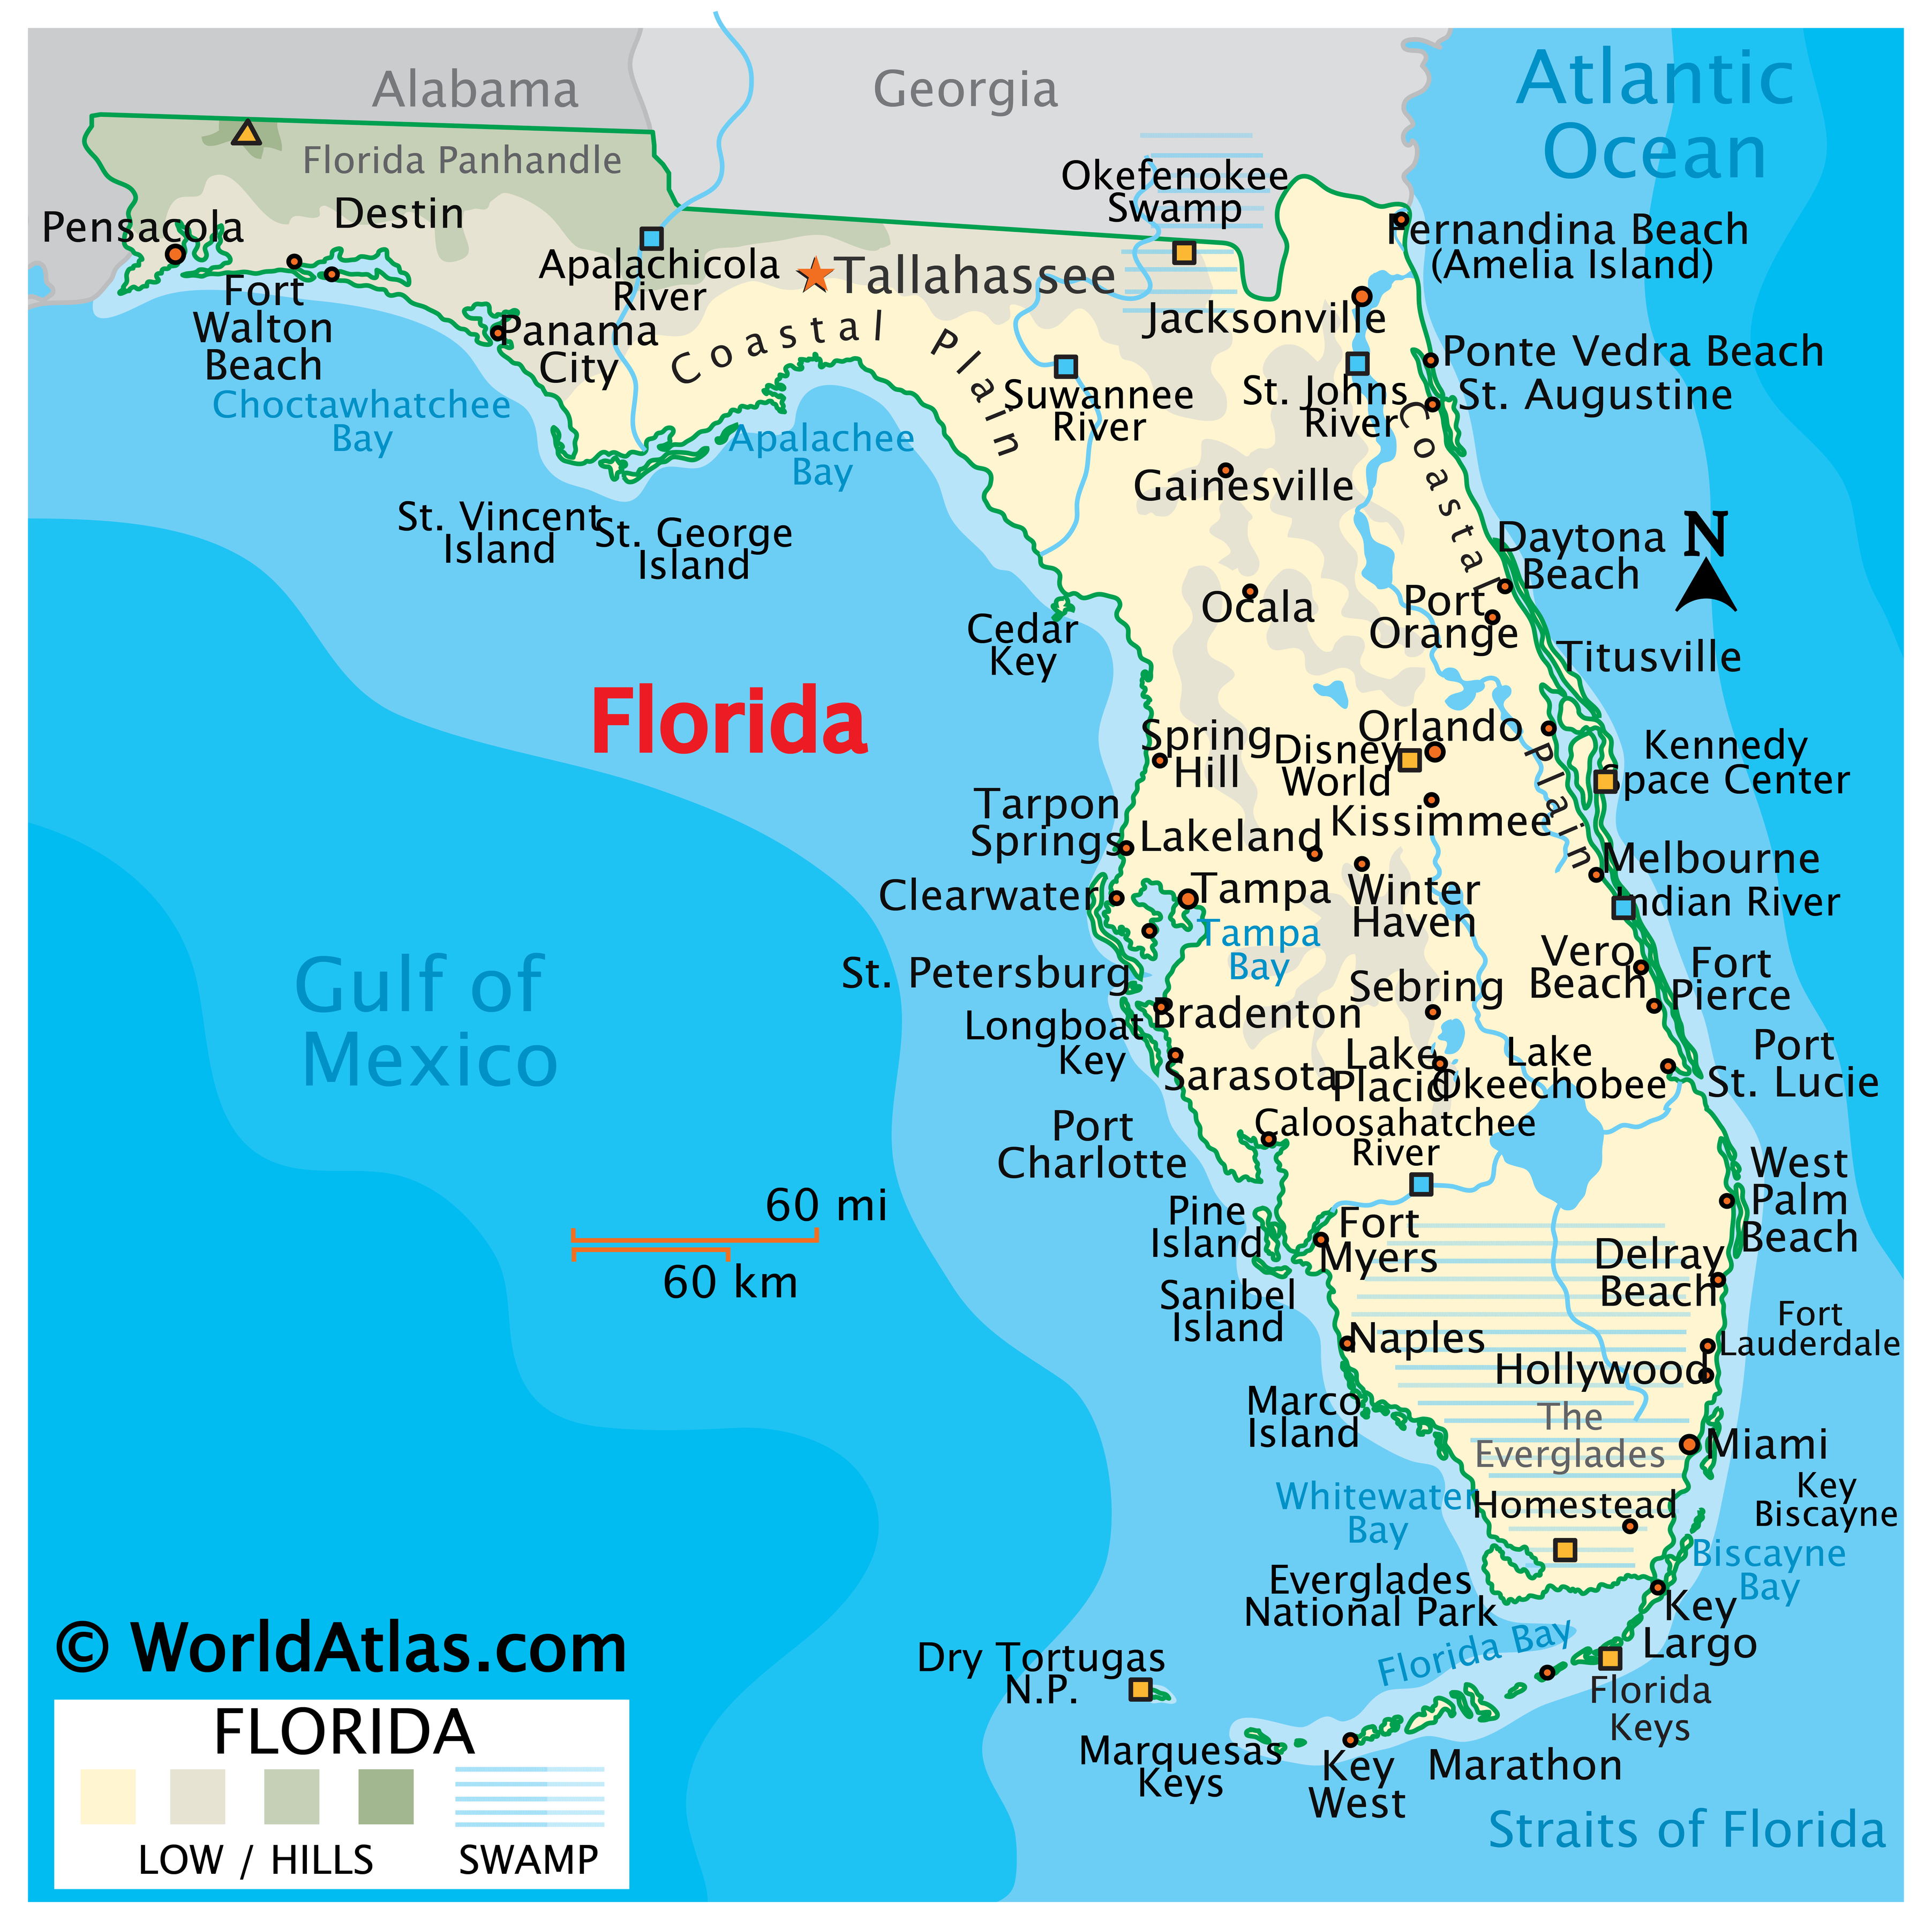 Orlando Florida Map, Attractions, Points of Interest